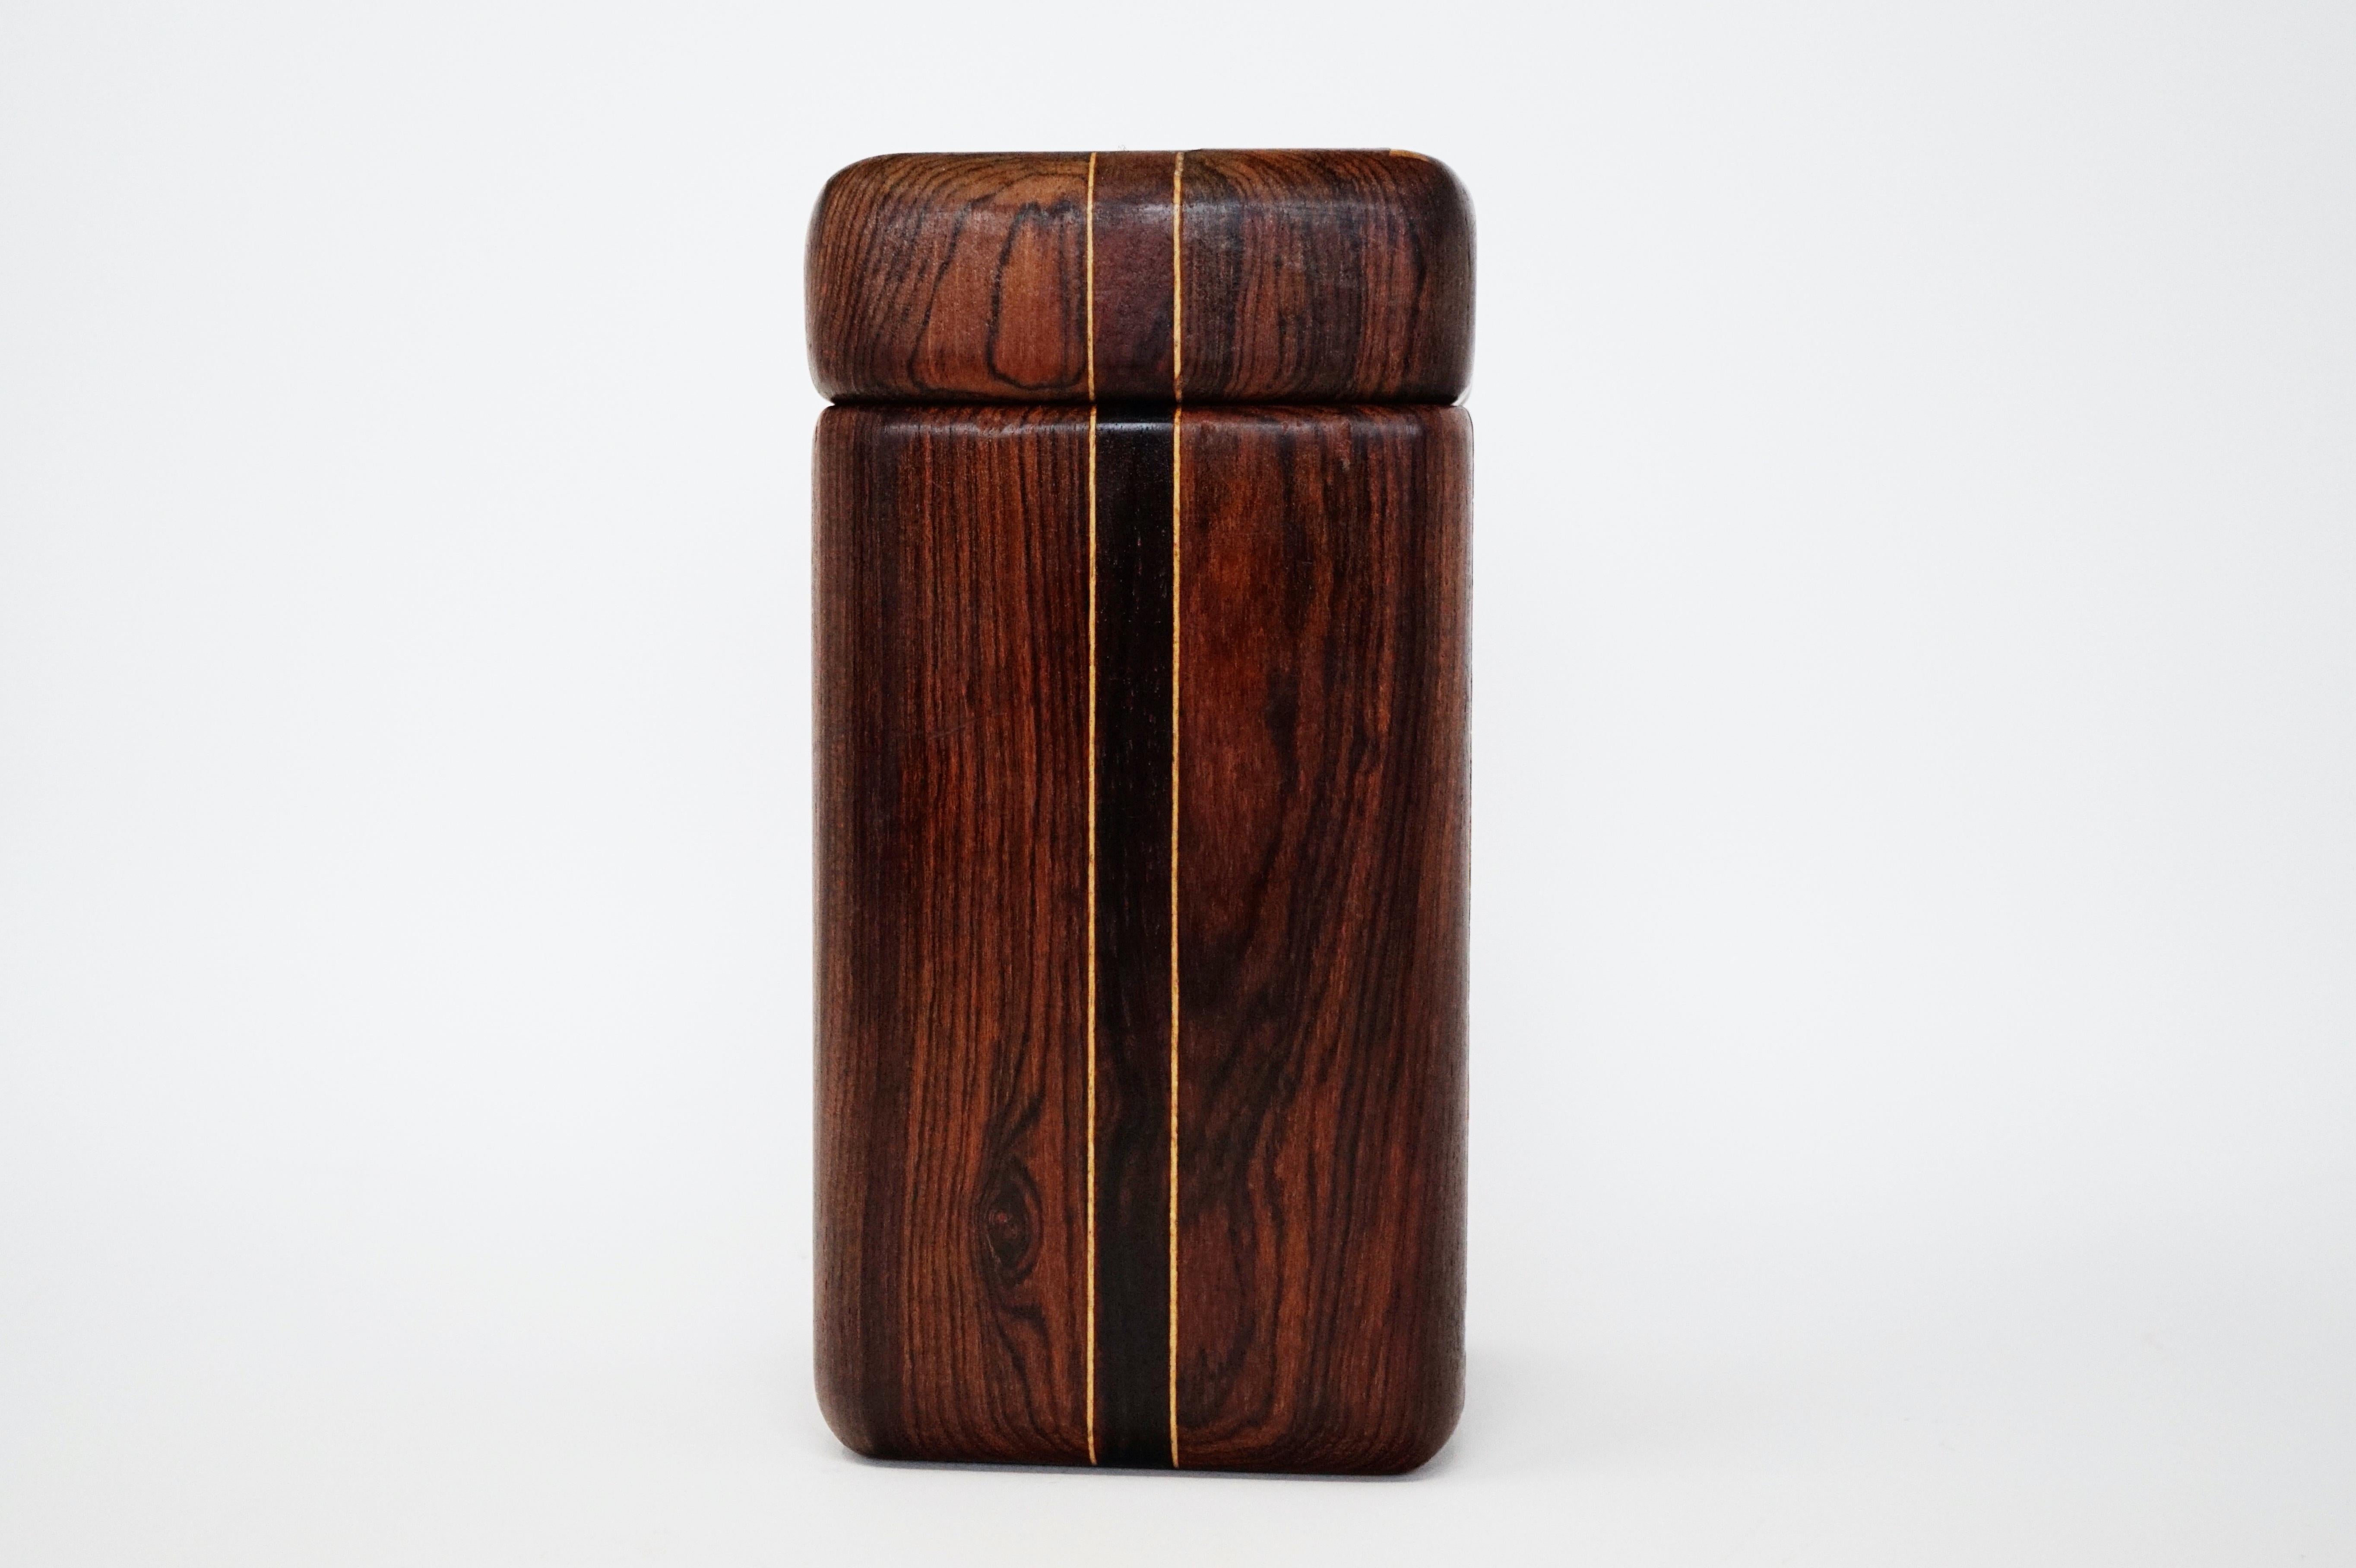 This incredible Cocobolo Rosewood large lidded catchall box by leading 1960s modernist designer Don Shoemaker for Senal S.A. is sought after by interior designers and avid collectors alike. This larger sized example is particularly perfect for the